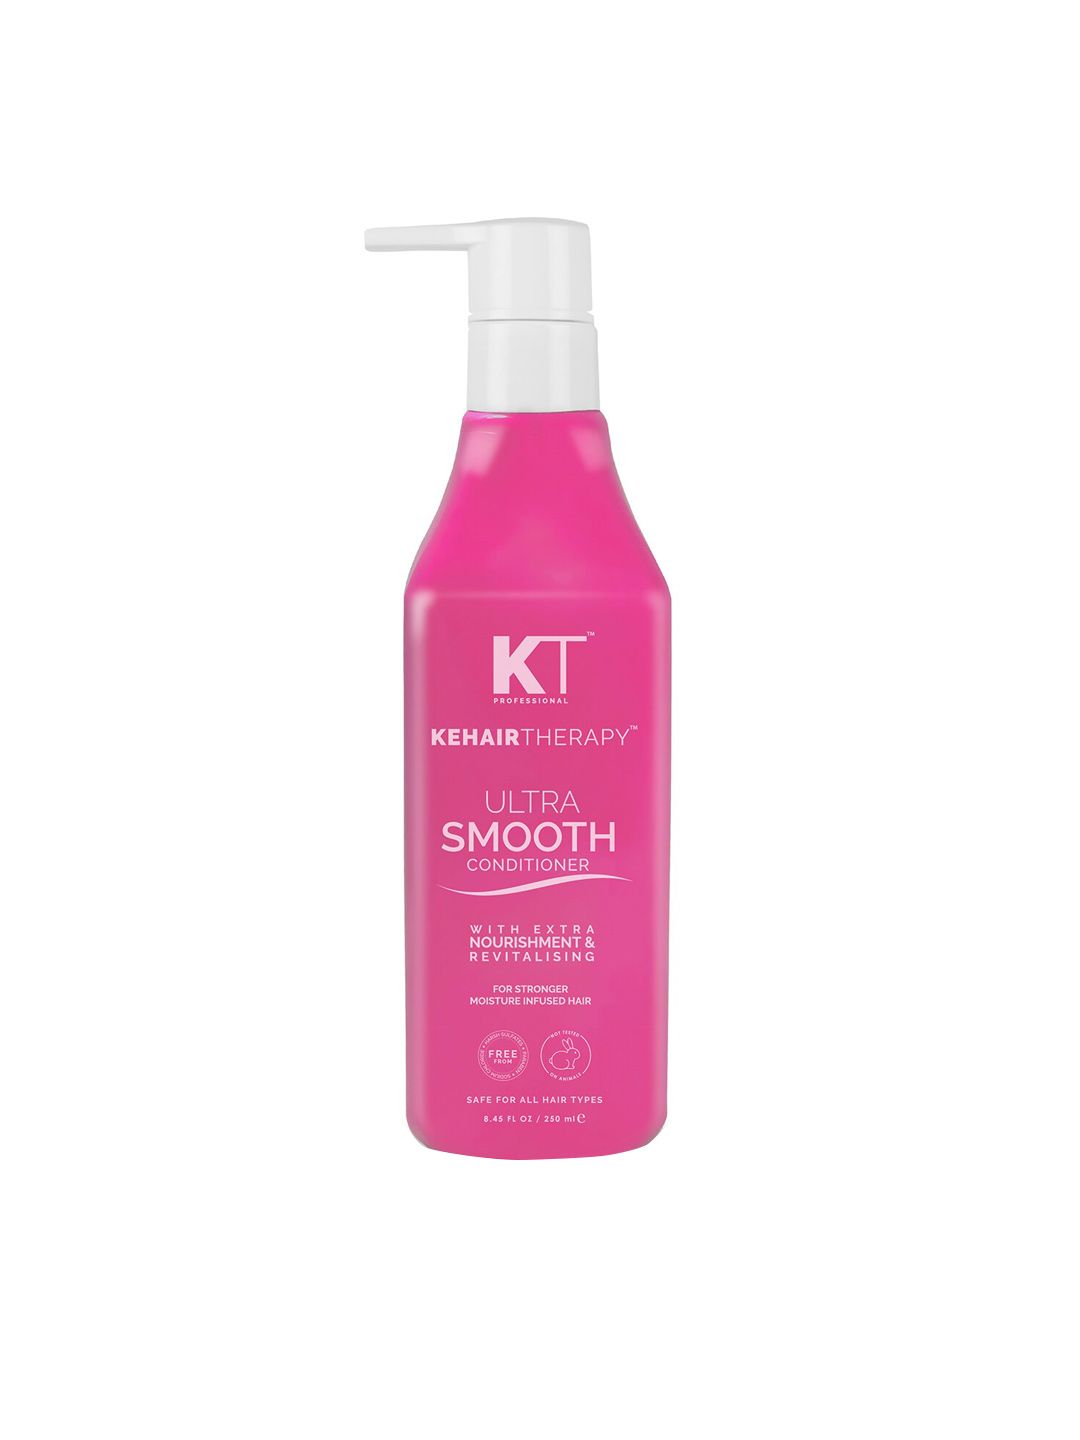 KEHAIRTHERAPY KT Professional Kehairtherapy Sulfate Free Ultra Smooth Conditioner 250 ml Price in India